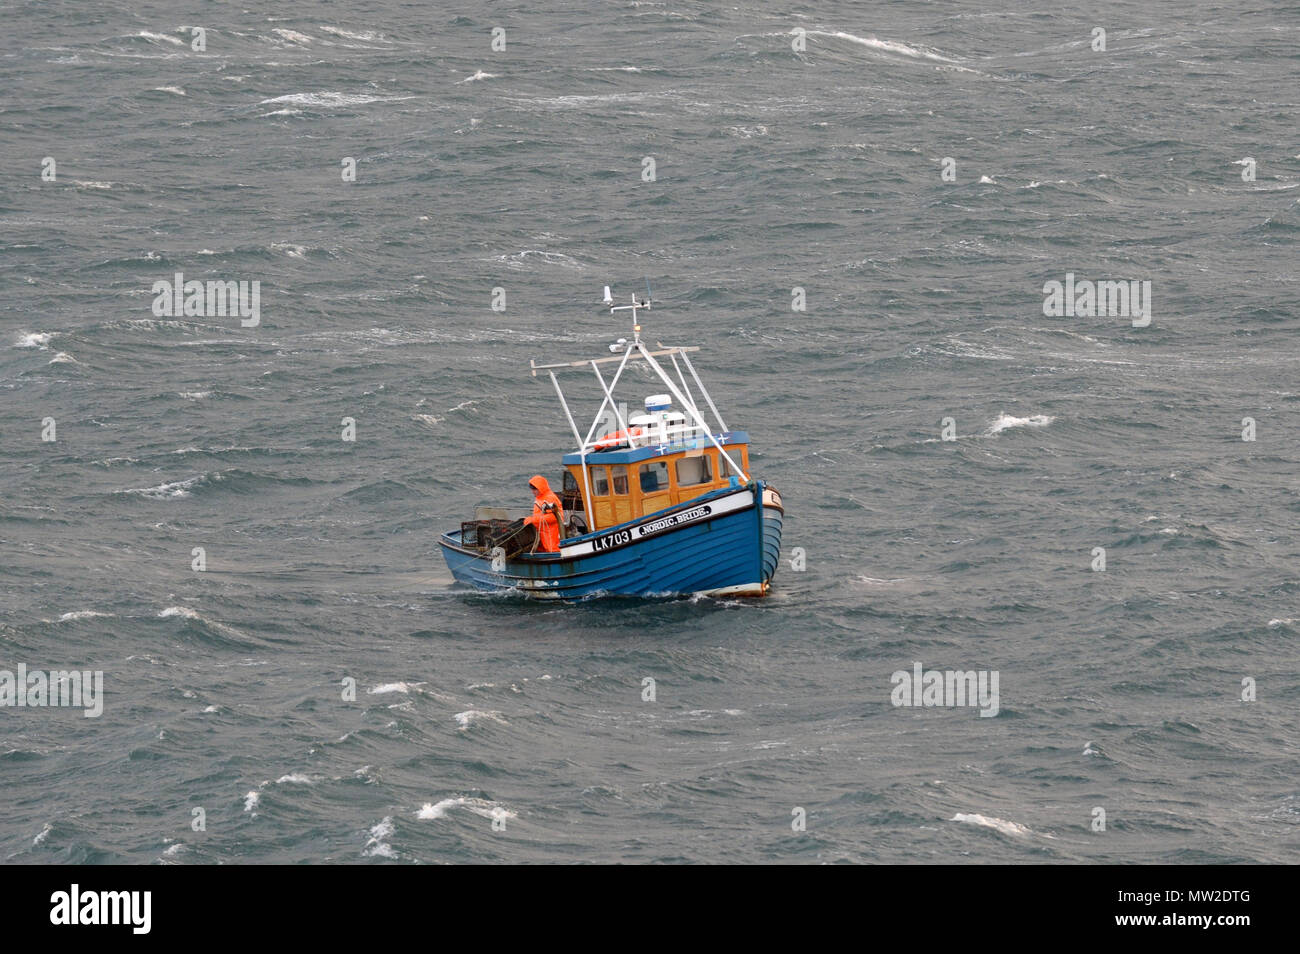 Small fishing boat at sea with 2 crew aboard picking up lobster baskets creel pot Stock Photo